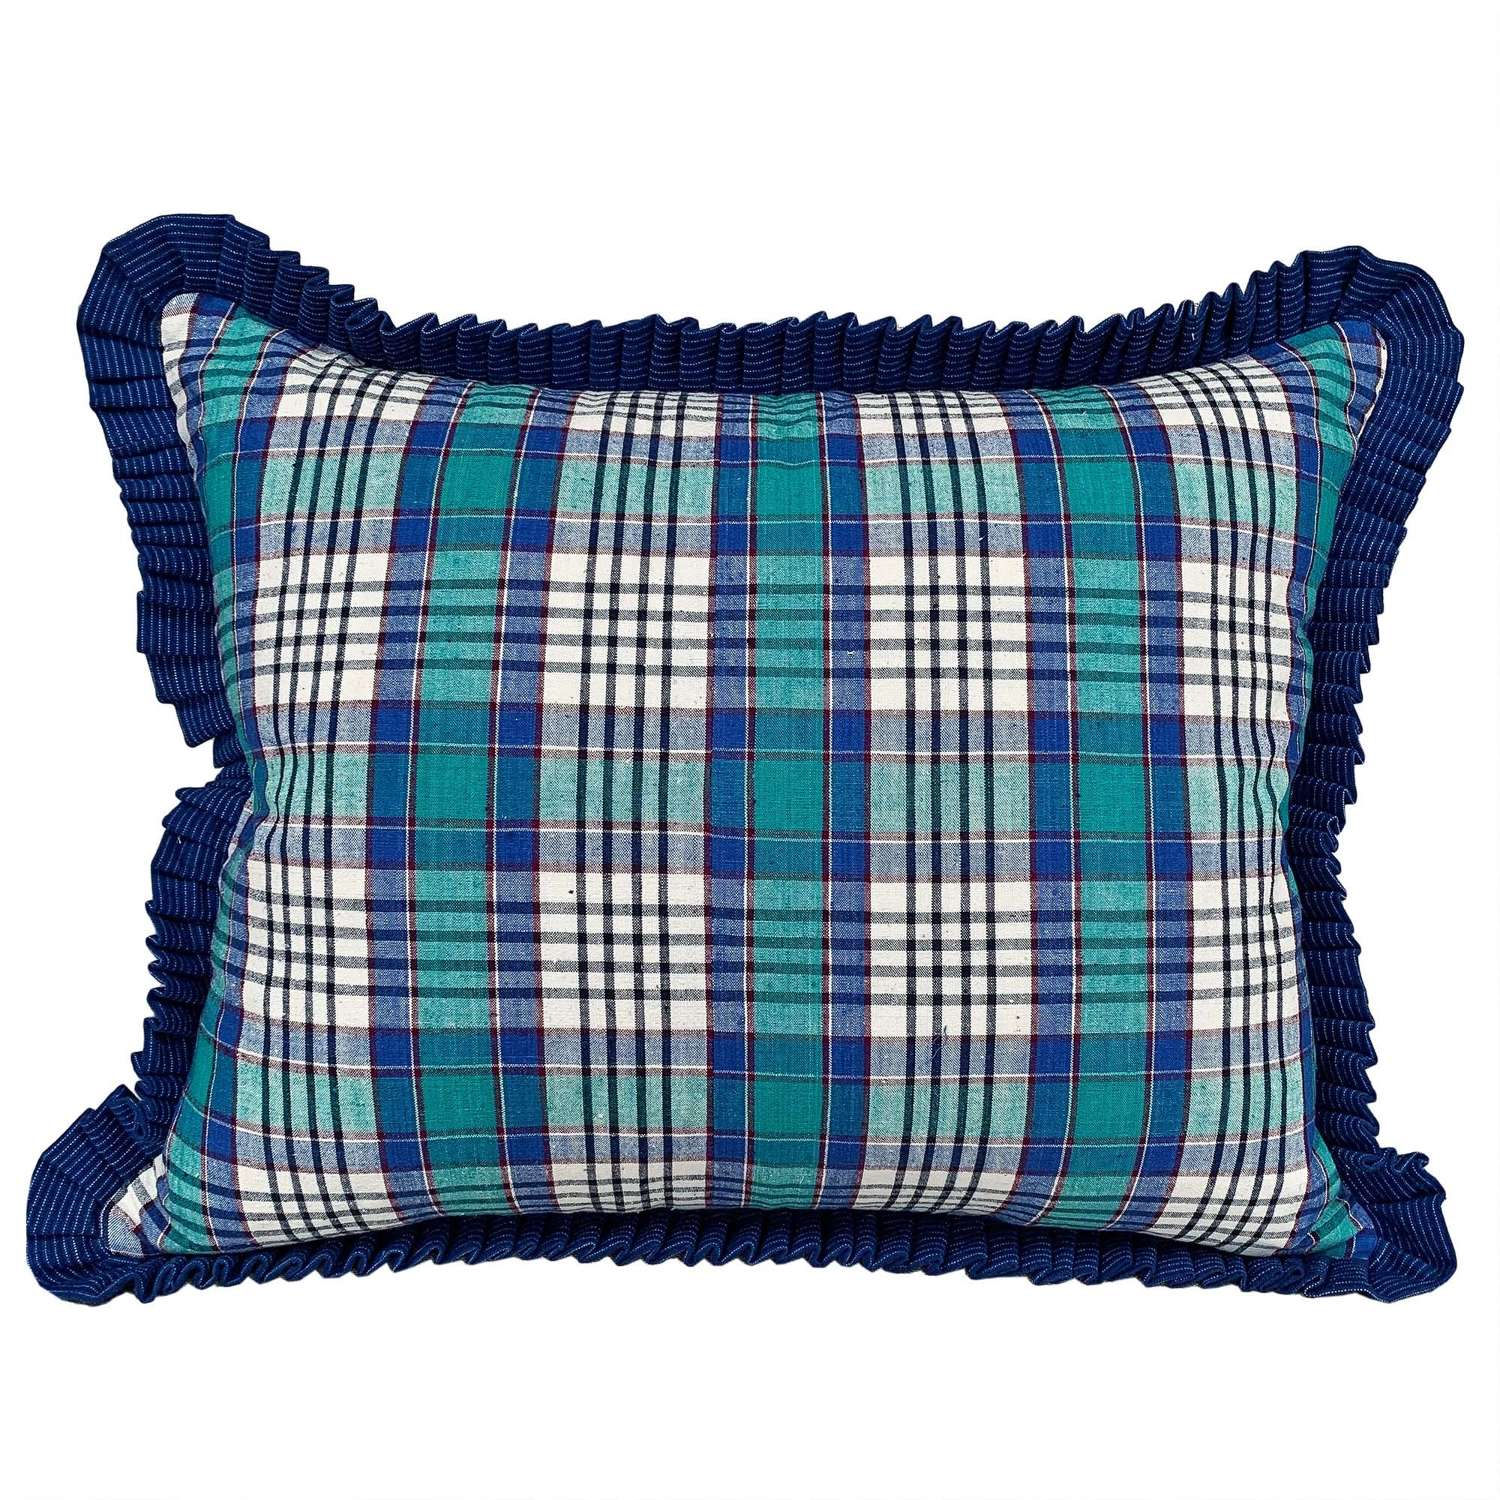 Songjiang Cushion With Pleated Trim